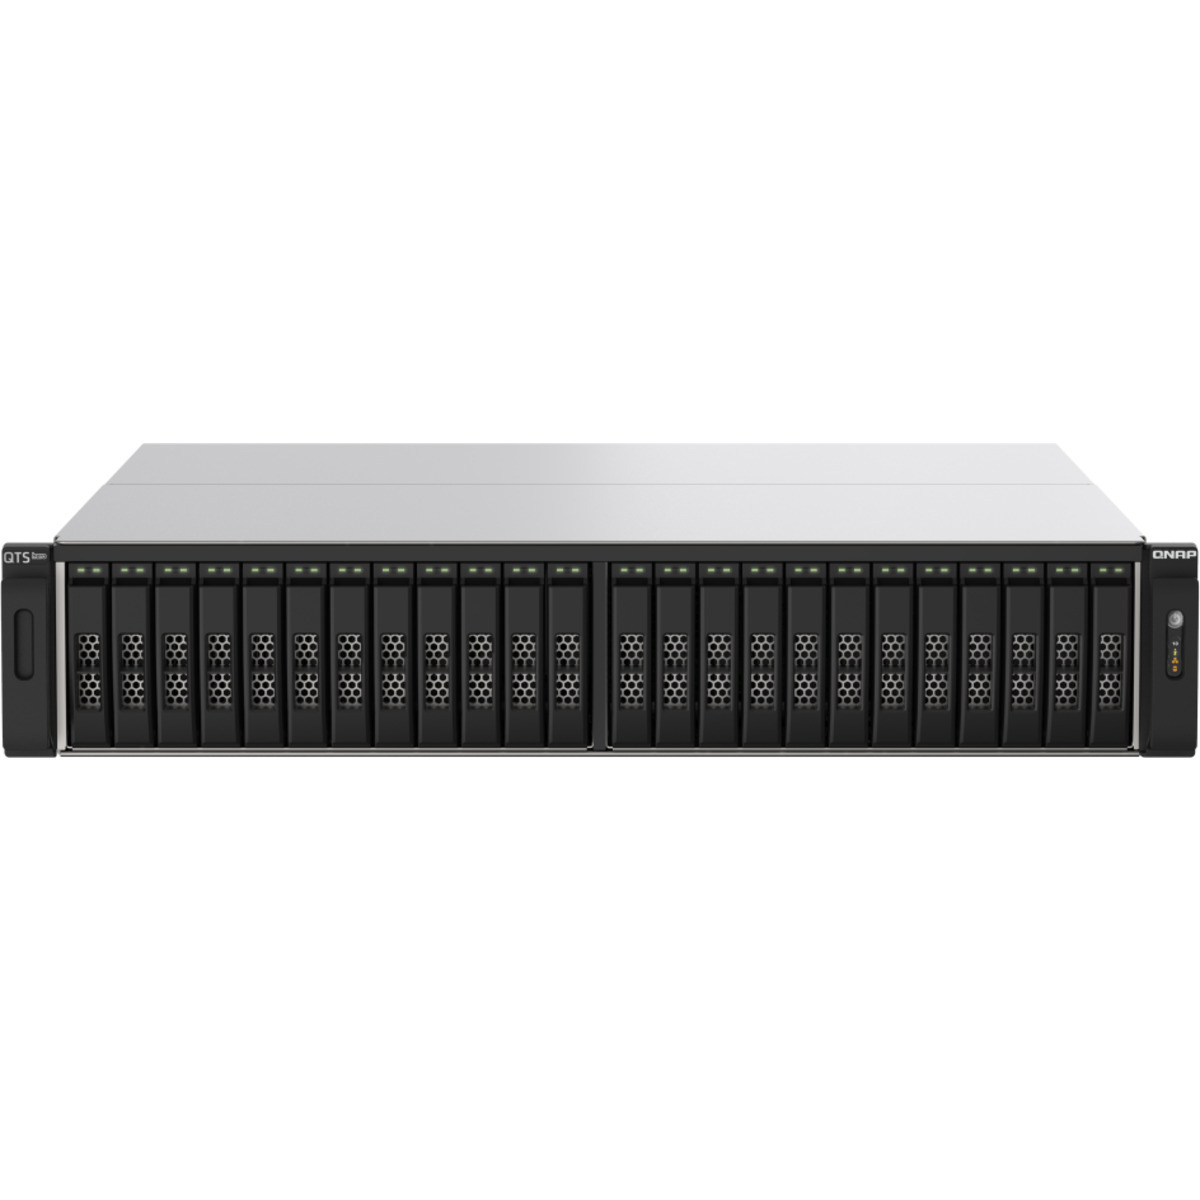 QNAP TS-h2490FU-7302P 36tb 24-Bay RackMount Large Business / Enterprise NAS - Network Attached Storage Device 18x2tb Samsung 990 PRO MZ-V9P2T0BW  7450/6900MB/s M.2 2280 NVMe SSD ENTERPRISE Class Drives Installed - Burn-In Tested TS-h2490FU-7302P